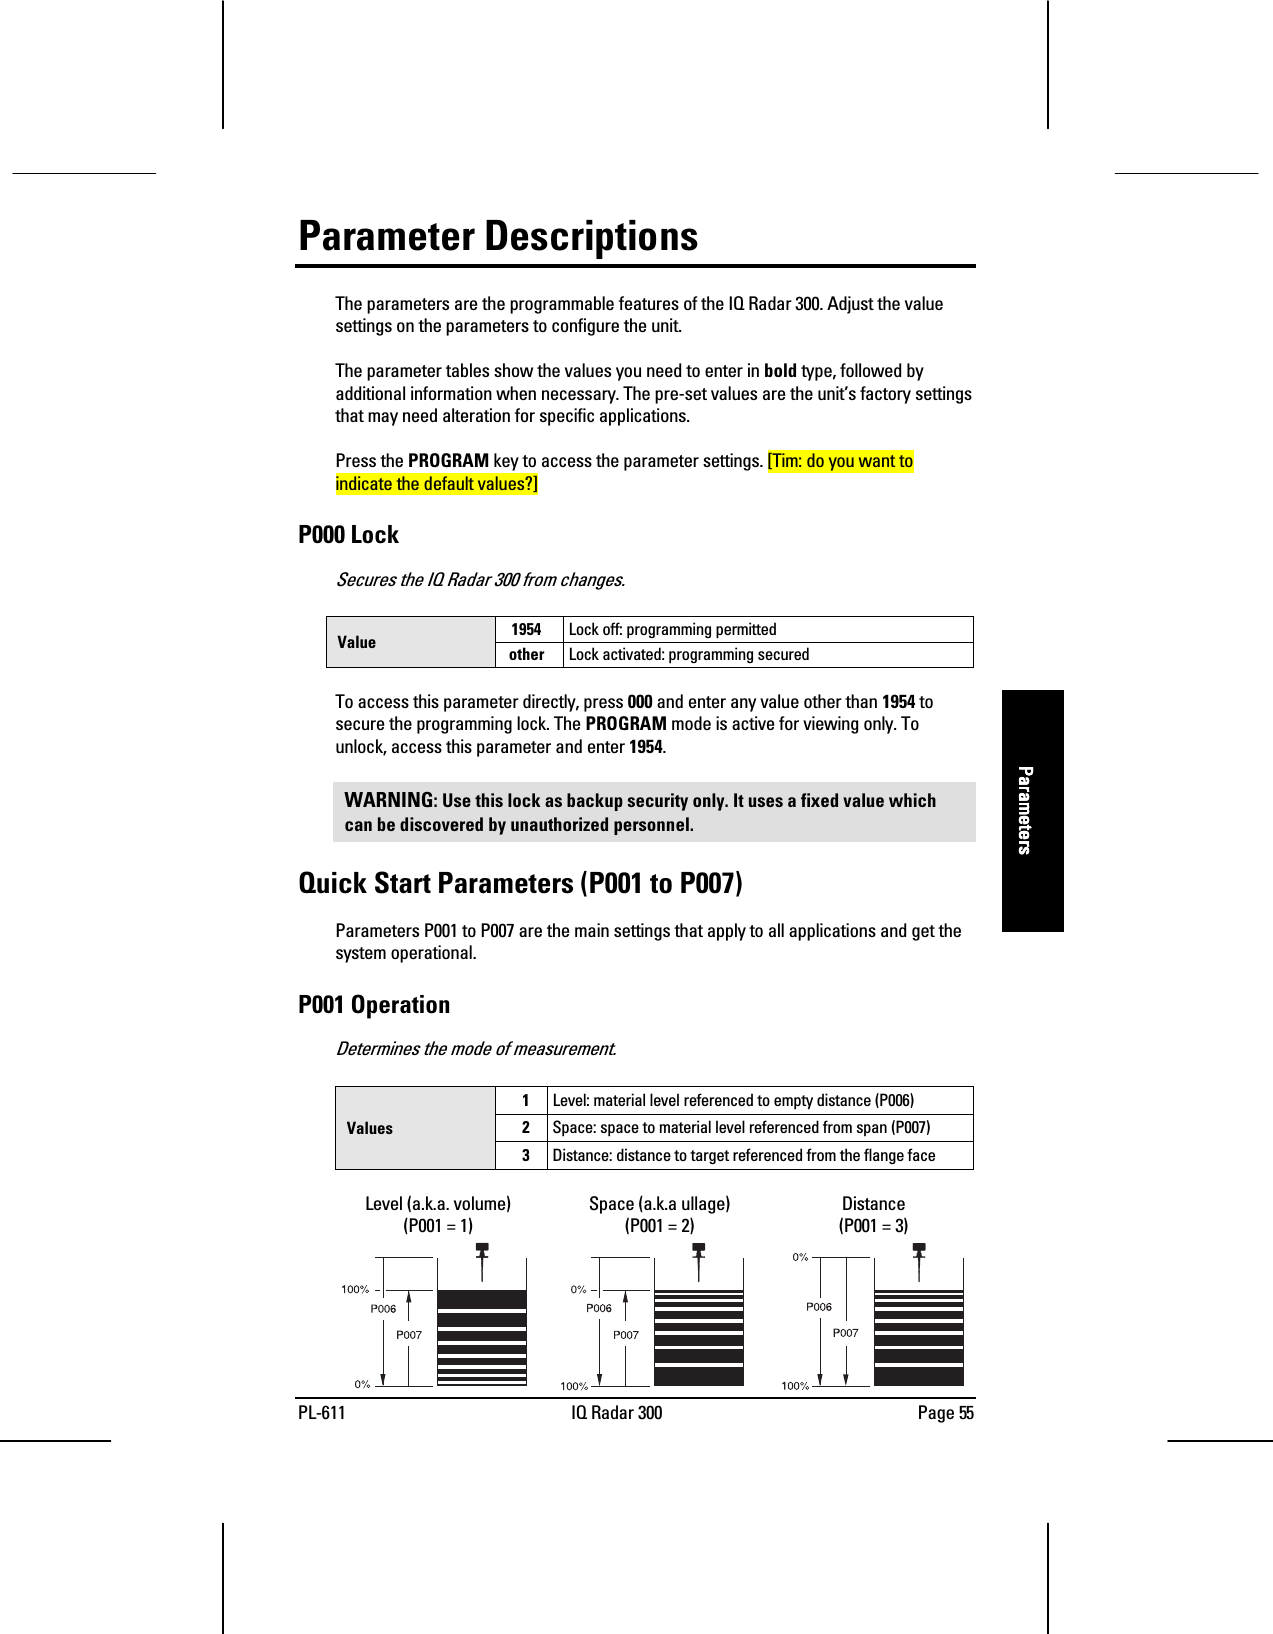 PL-611 IQ Radar 300 Page 55ParametersParametersParametersParametersParameter DescriptionsThe parameters are the programmable features of the IQ Radar 300. Adjust the valuesettings on the parameters to configure the unit.The parameter tables show the values you need to enter in bold type, followed byadditional information when necessary. The pre-set values are the unit’s factory settingsthat may need alteration for specific applications.Press the PROGRAM key to access the parameter settings. [Tim: do you want toindicate the default values?]P000 LockSecures the IQ Radar 300 from changes.1954 Lock off: programming permittedValue other Lock activated: programming securedTo access this parameter directly, press 000 and enter any value other than 1954 tosecure the programming lock. The PROGRAM mode is active for viewing only. Tounlock, access this parameter and enter 1954.WARNING: Use this lock as backup security only. It uses a fixed value whichcan be discovered by unauthorized personnel.Quick Start Parameters (P001 to P007)Parameters P001 to P007 are the main settings that apply to all applications and get thesystem operational.P001 OperationDetermines the mode of measurement.1Level: material level referenced to empty distance (P006)2Space: space to material level referenced from span (P007)Values3Distance: distance to target referenced from the flange faceLevel (a.k.a. volume)(P001 = 1)Space (a.k.a ullage)(P001 = 2)Distance(P001 = 3)